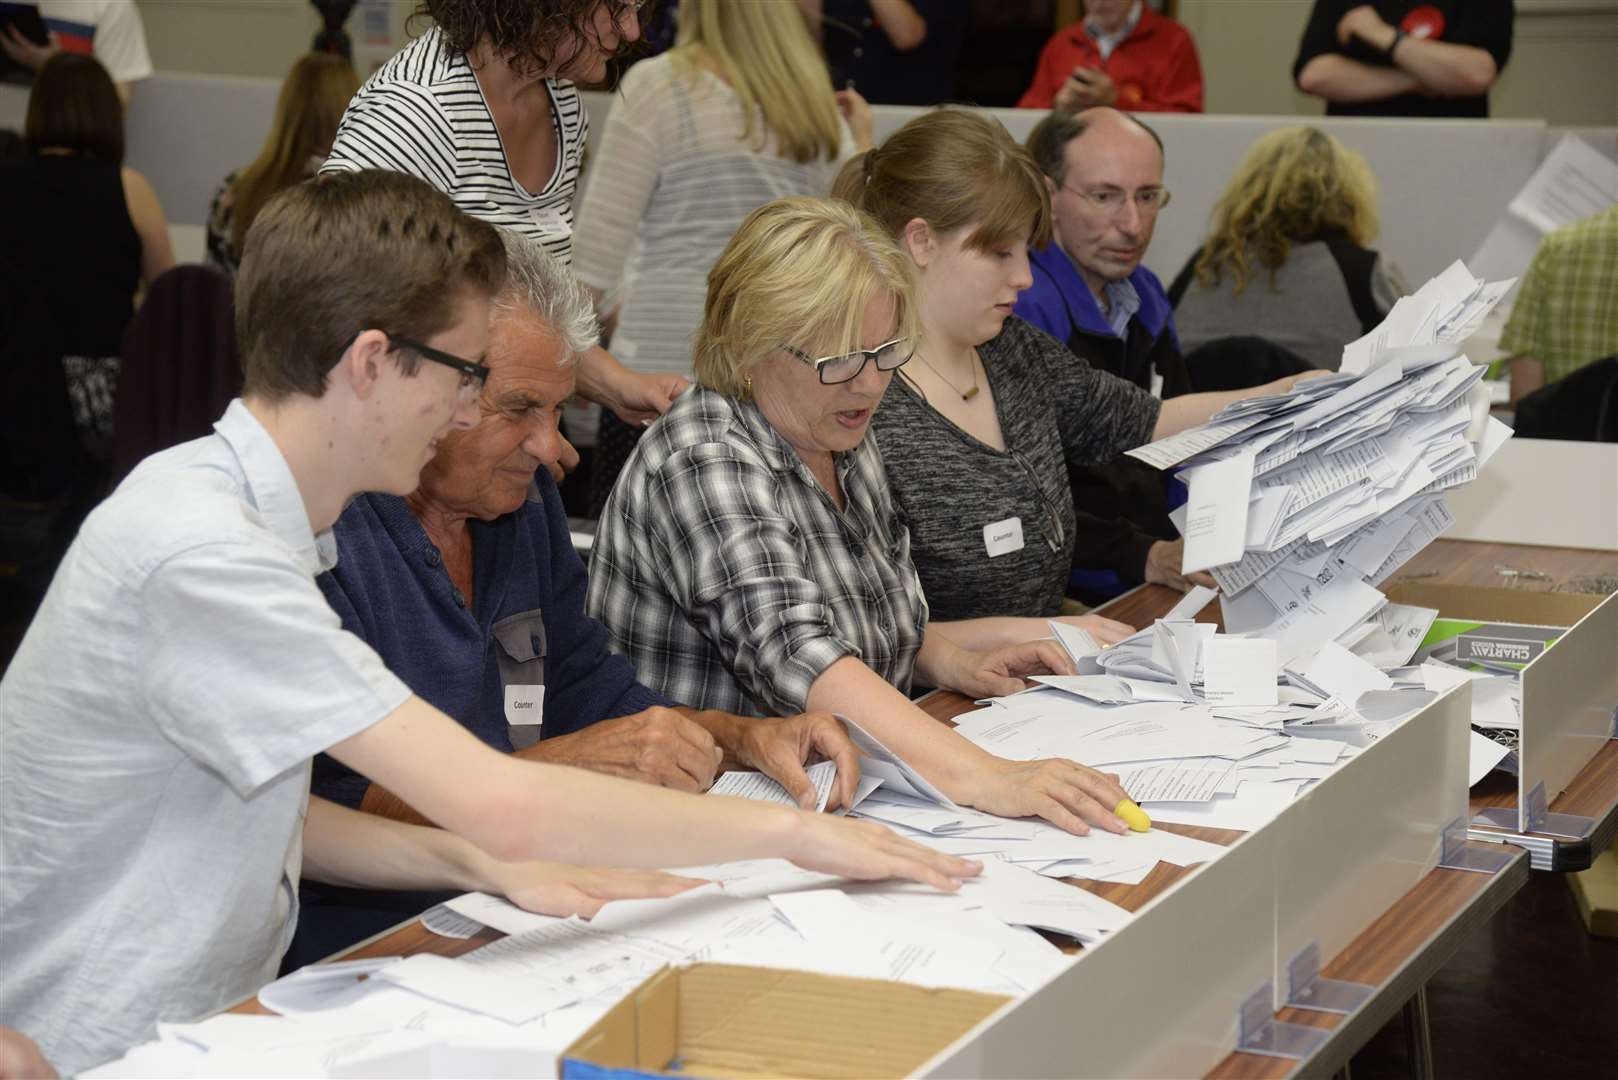 There was a recount in Canterbury in 2017 - will we see another?